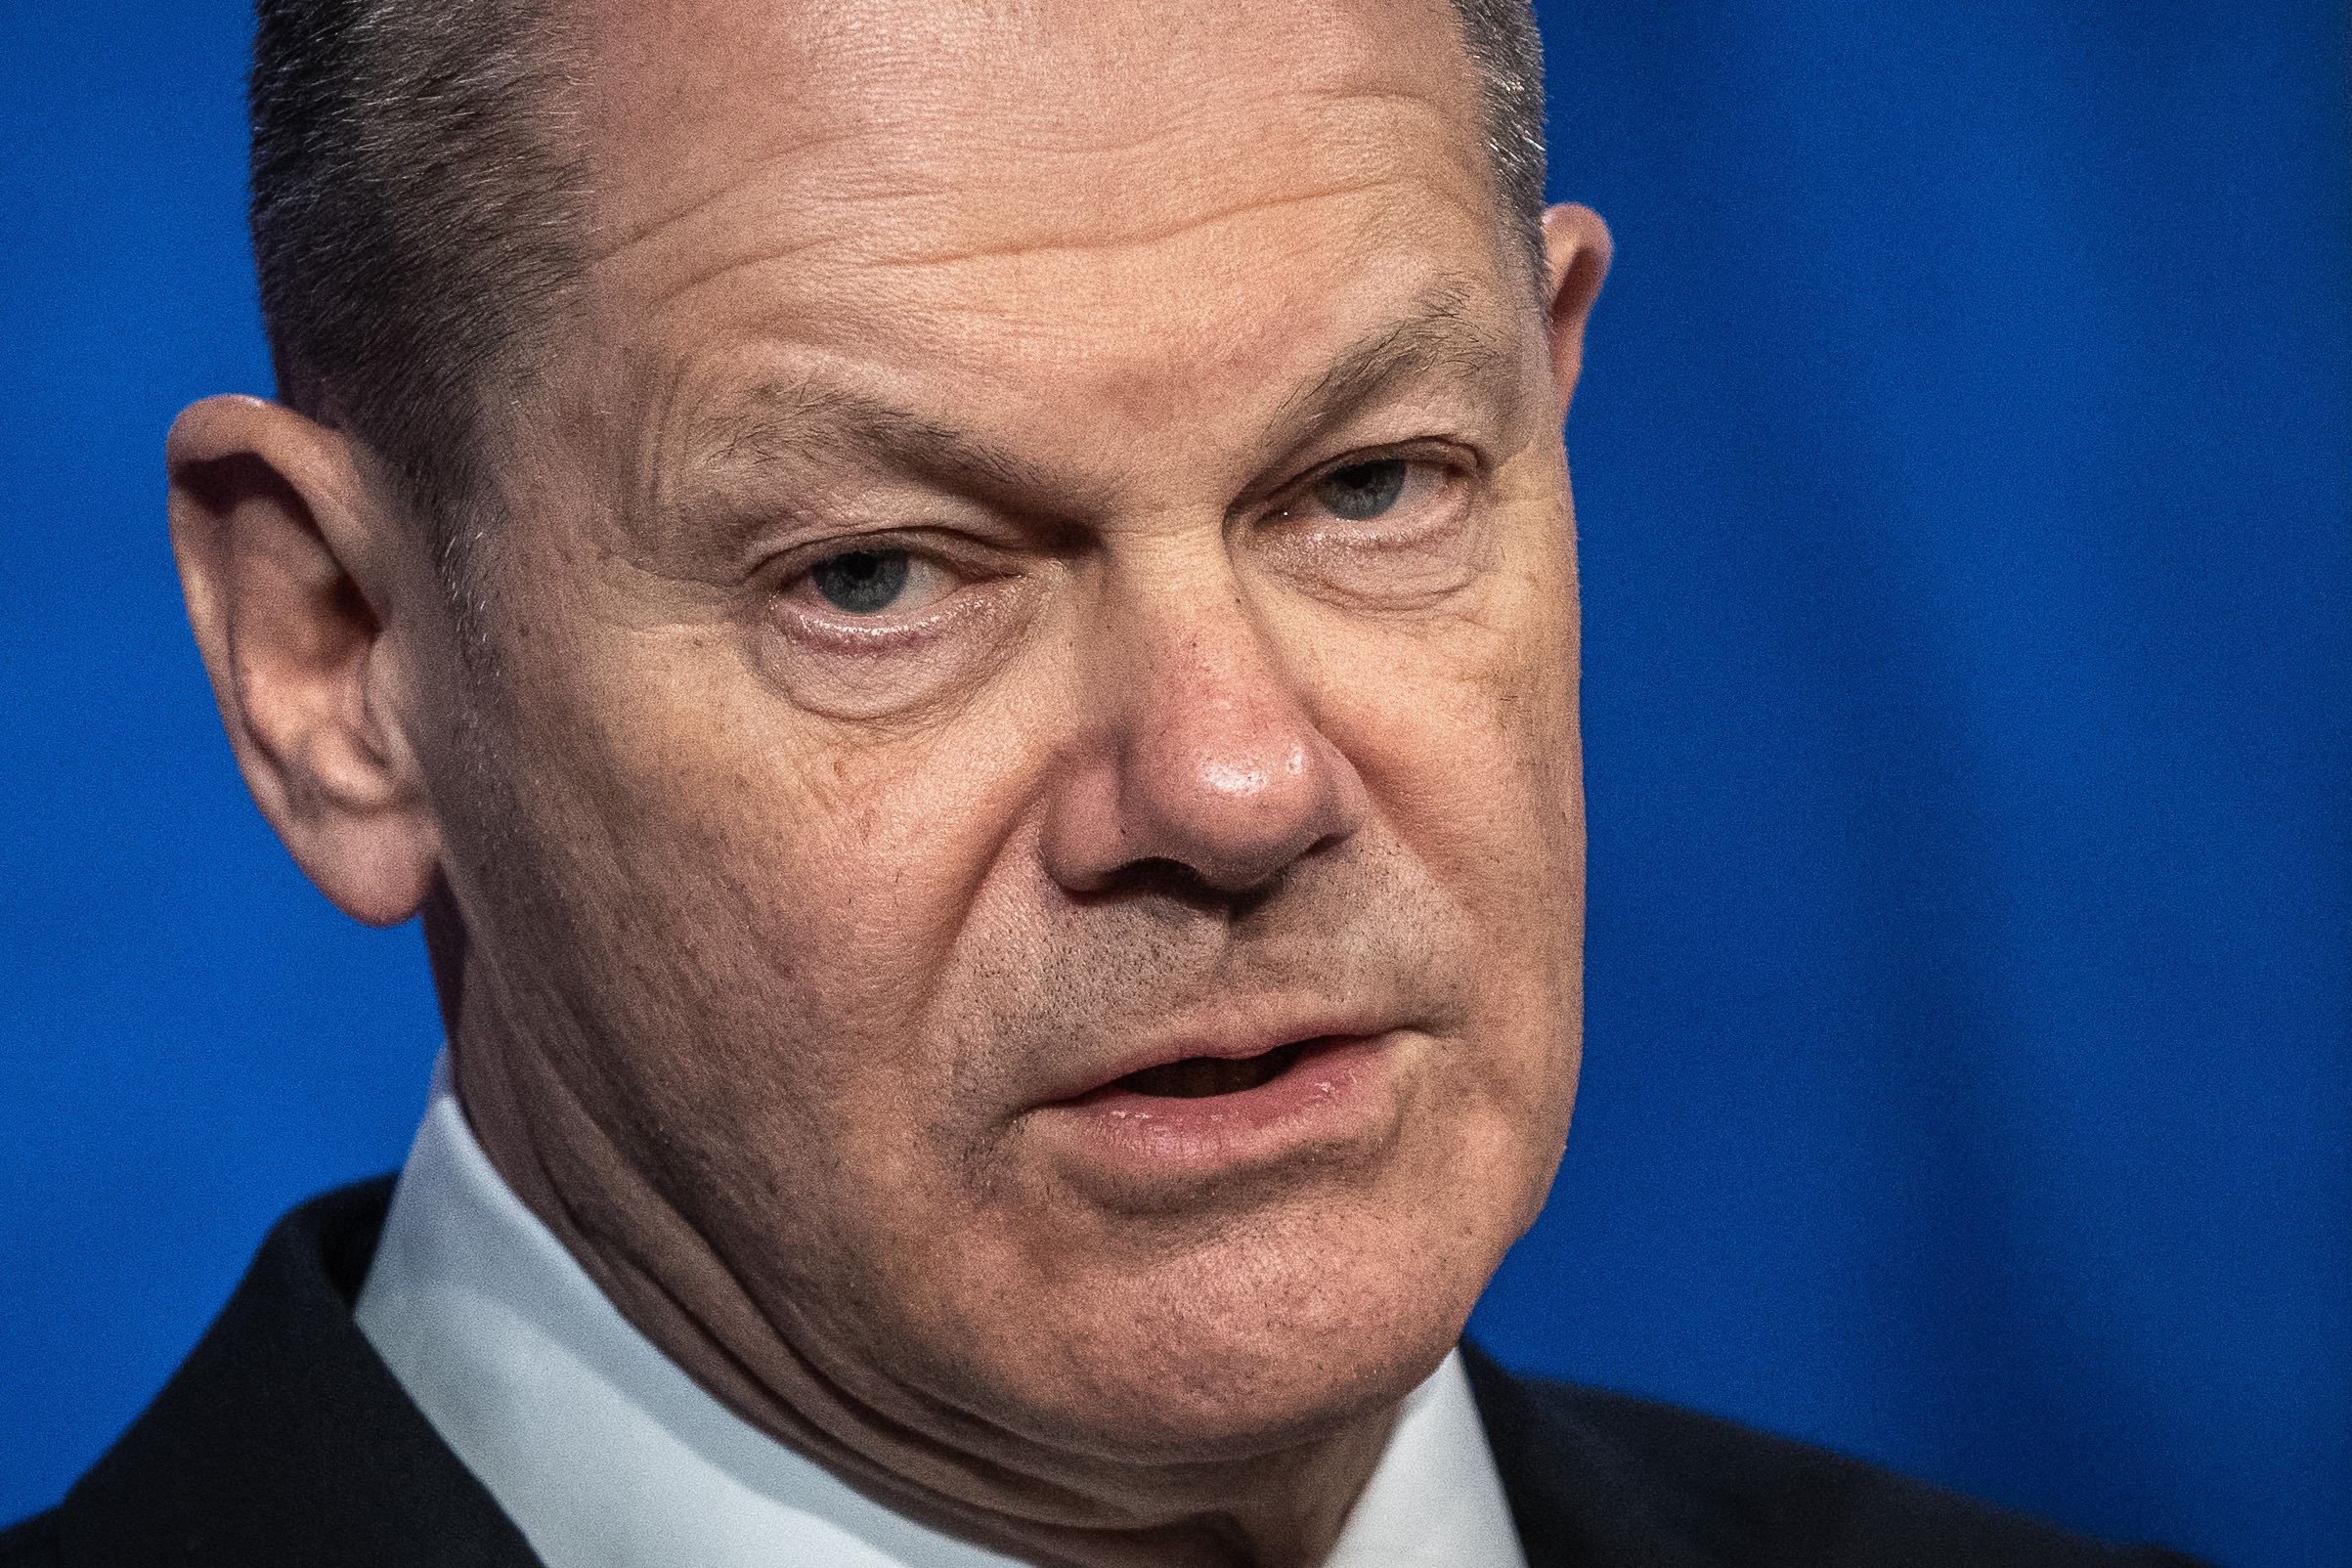 'Too little, too late': Scholz under fire for inaction on Ukraine